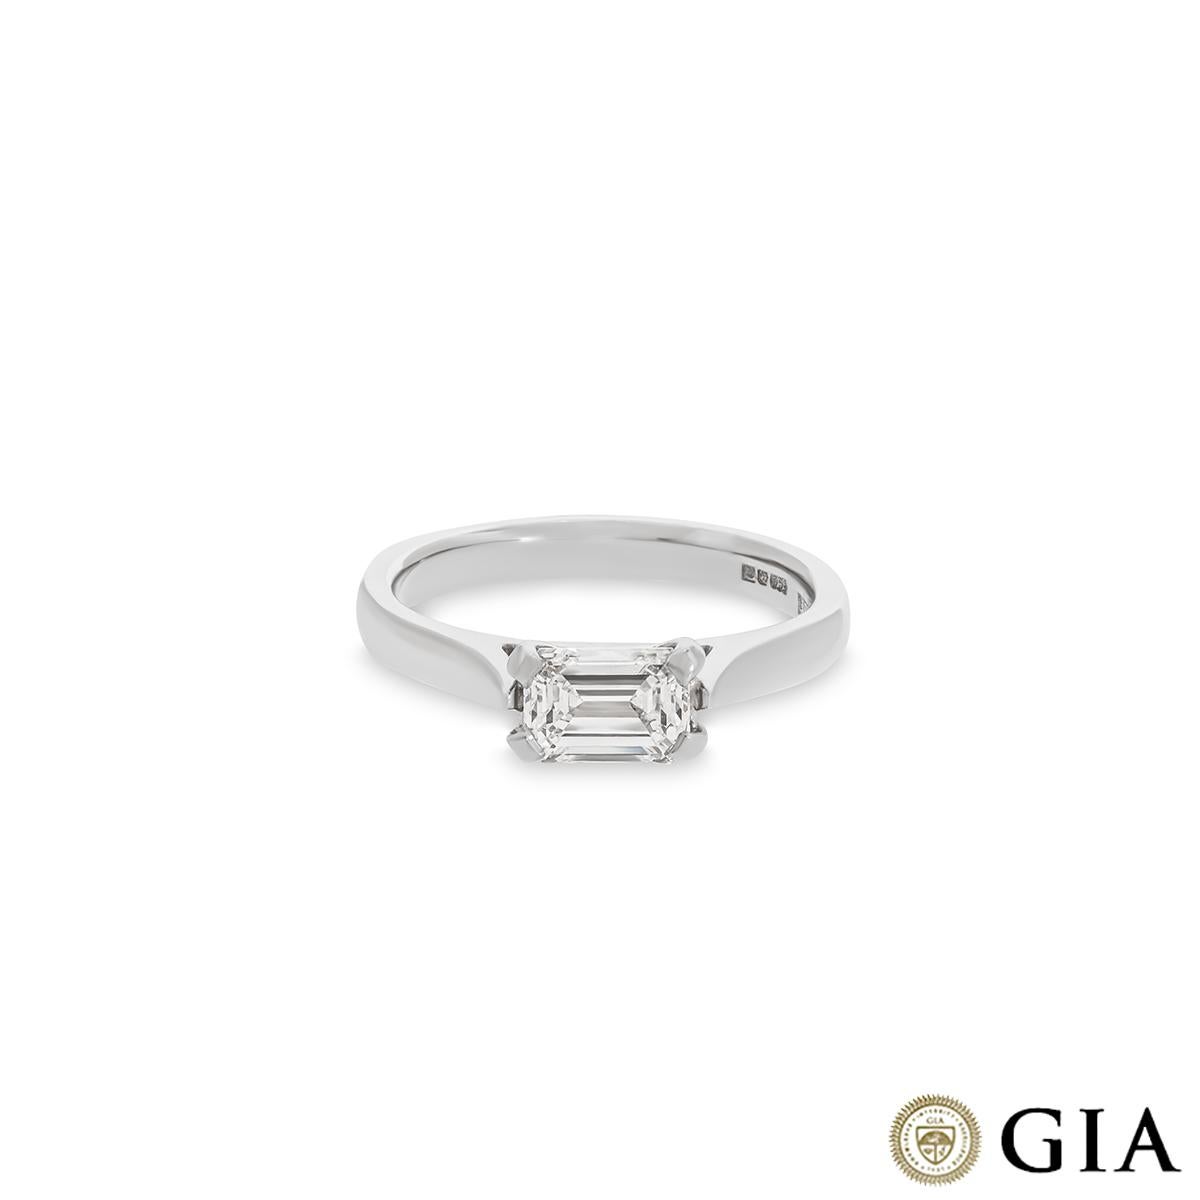 GIA Certified Platinum Emerald Cut Diamond Ring 0.73ct E/VVS2 In Excellent Condition For Sale In London, GB